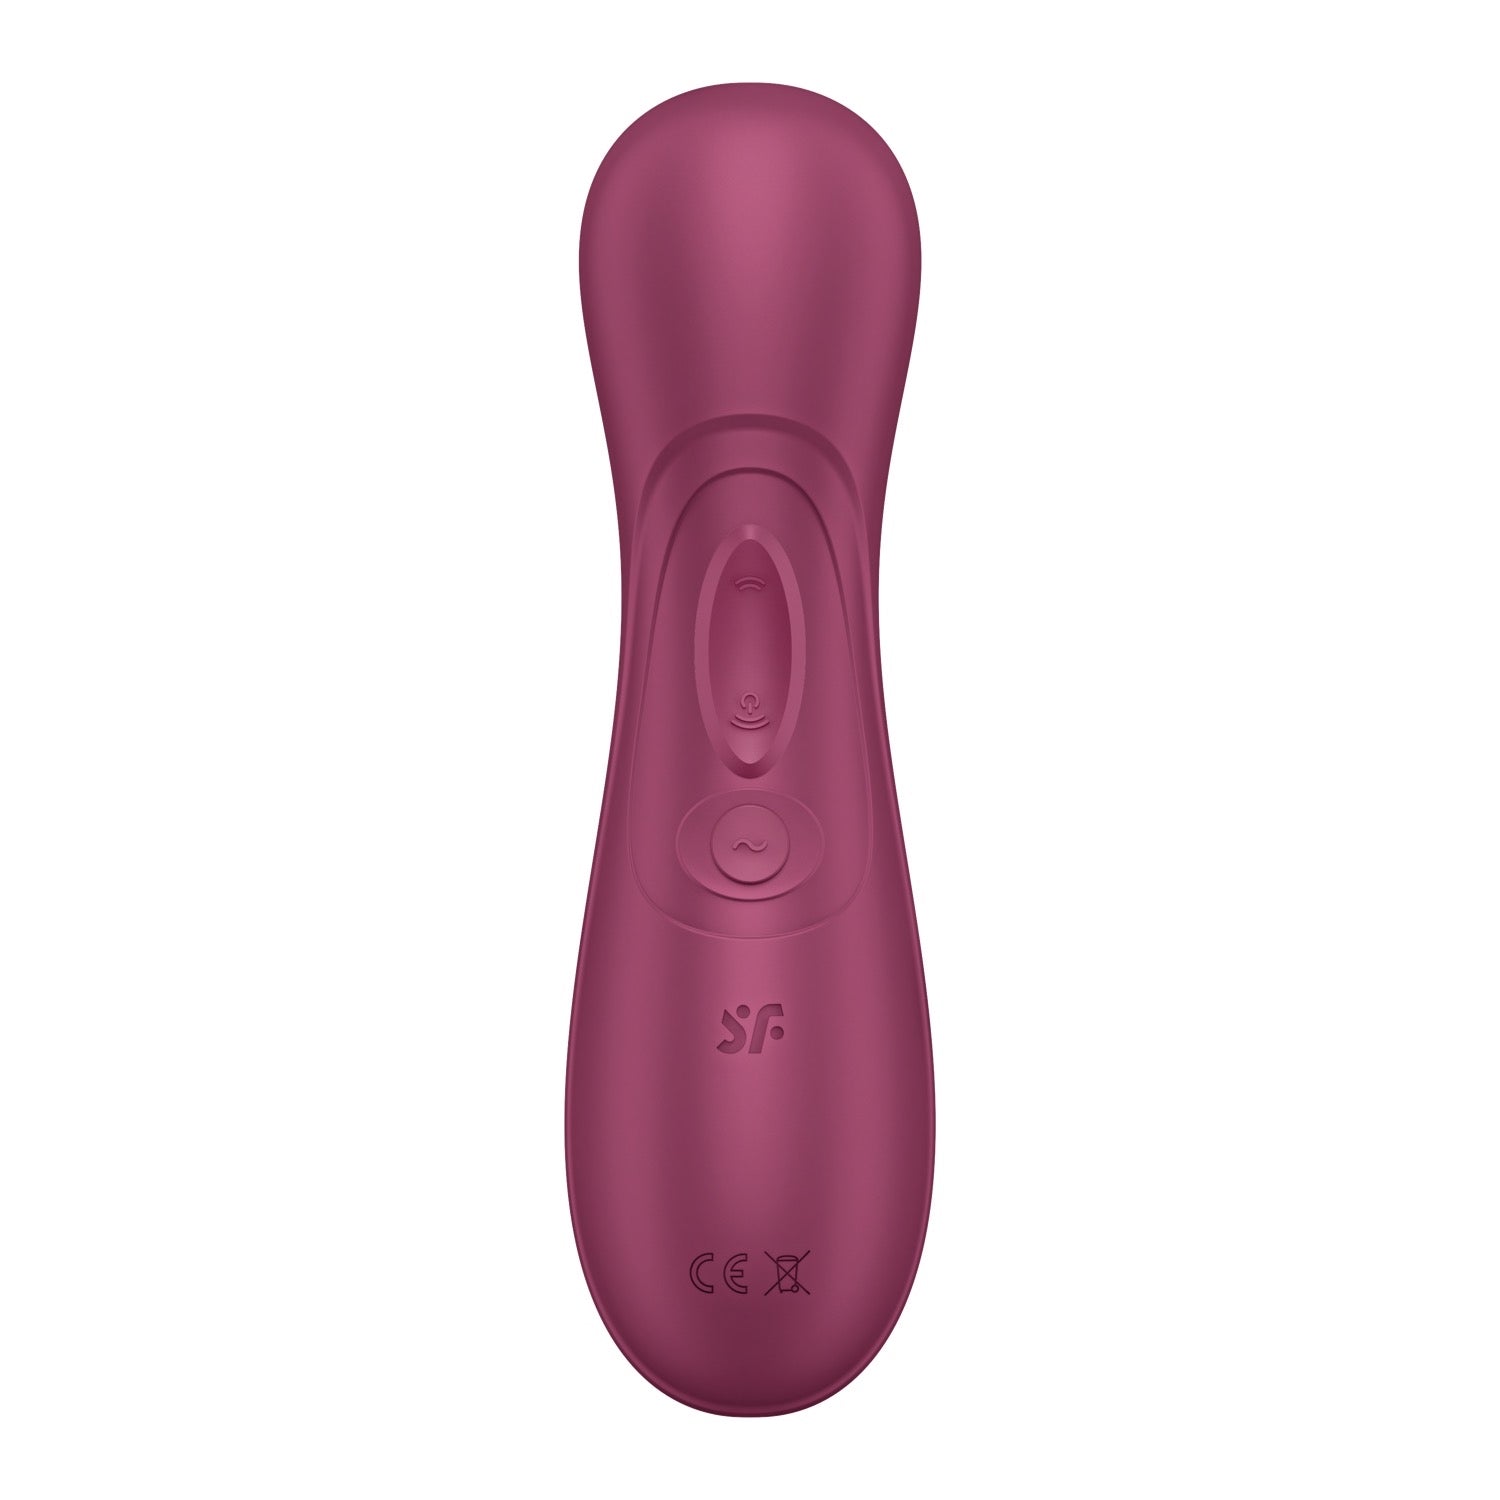 Satisfyer Pro 2 Generation 3 with App Control - Red by Satisfyer